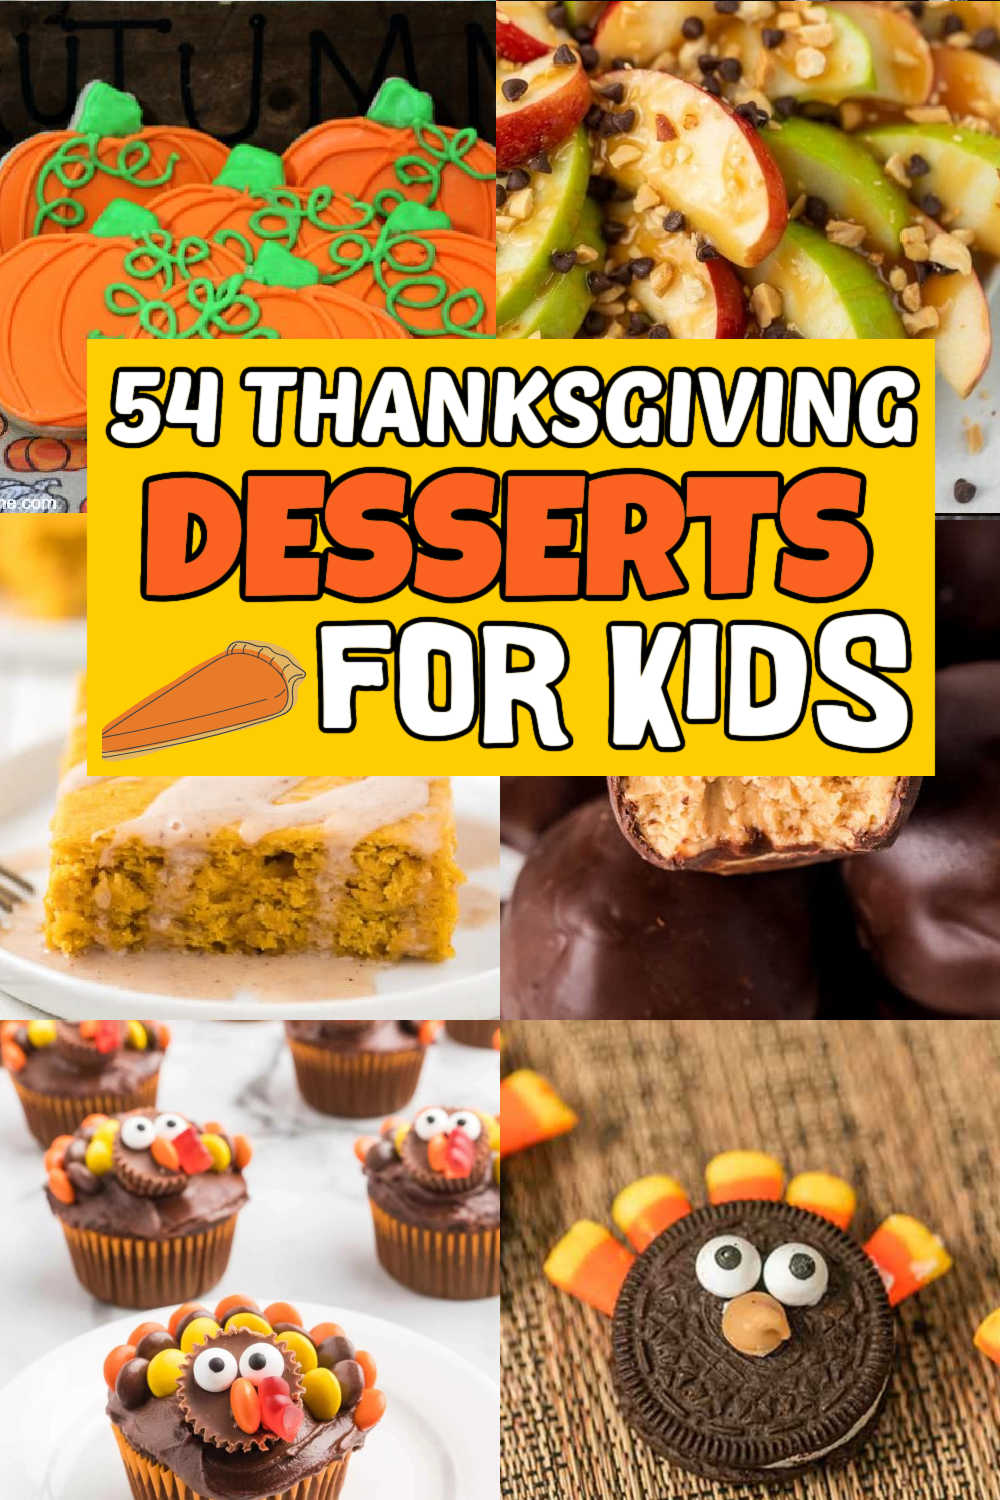 Make Thanksgiving memorable for the whole family by following these easy Thanksgiving desserts for kids. These easy-to-follow recipes will make the cooking part of Thanksgiving exciting and fun. From turkey Oreo cookies to the classic pie, we’ve prepared easy Thanksgiving desserts for kids. #eatingonadime #thanksgivingdessertsforkids #dessertsforkids